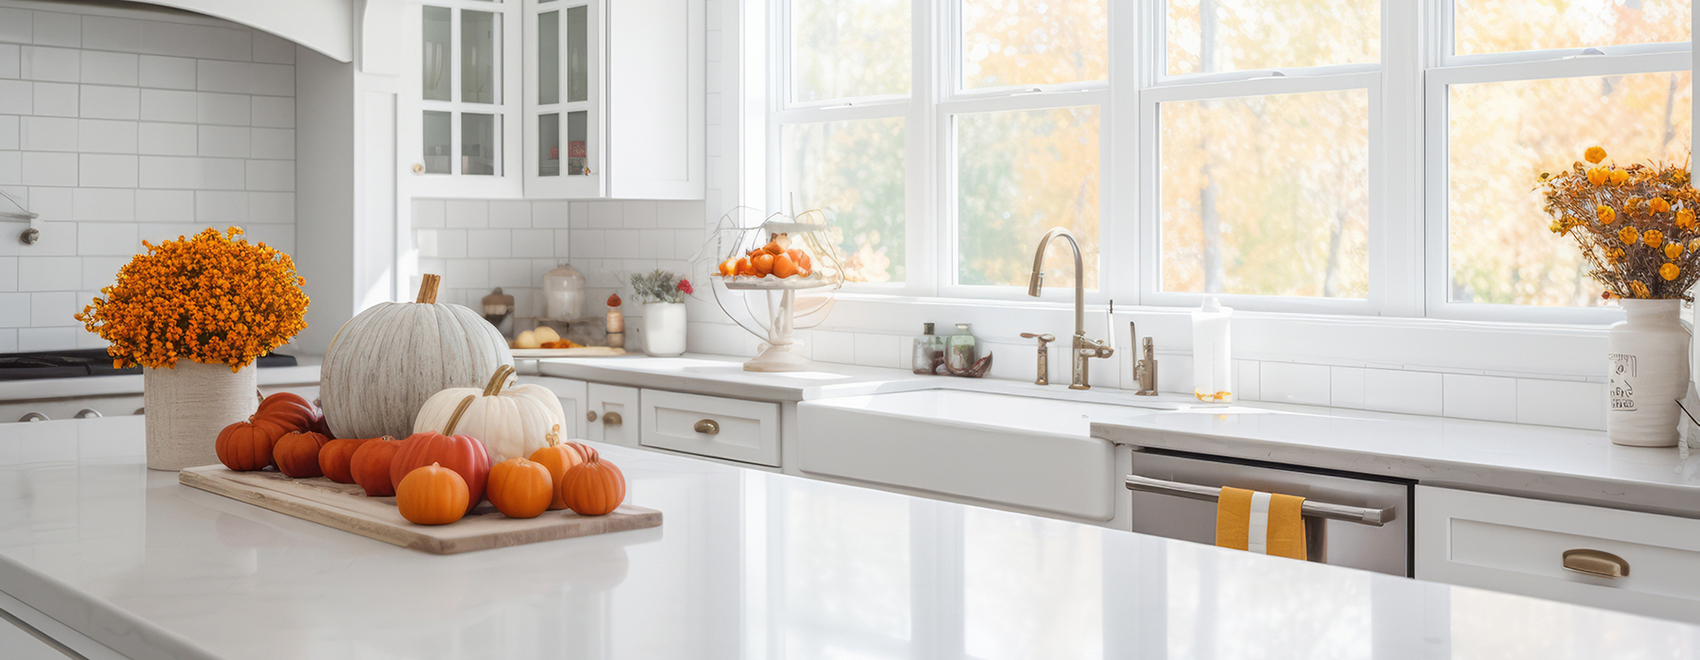 White modern kitchen decorated for fall with pumpkins and leaves